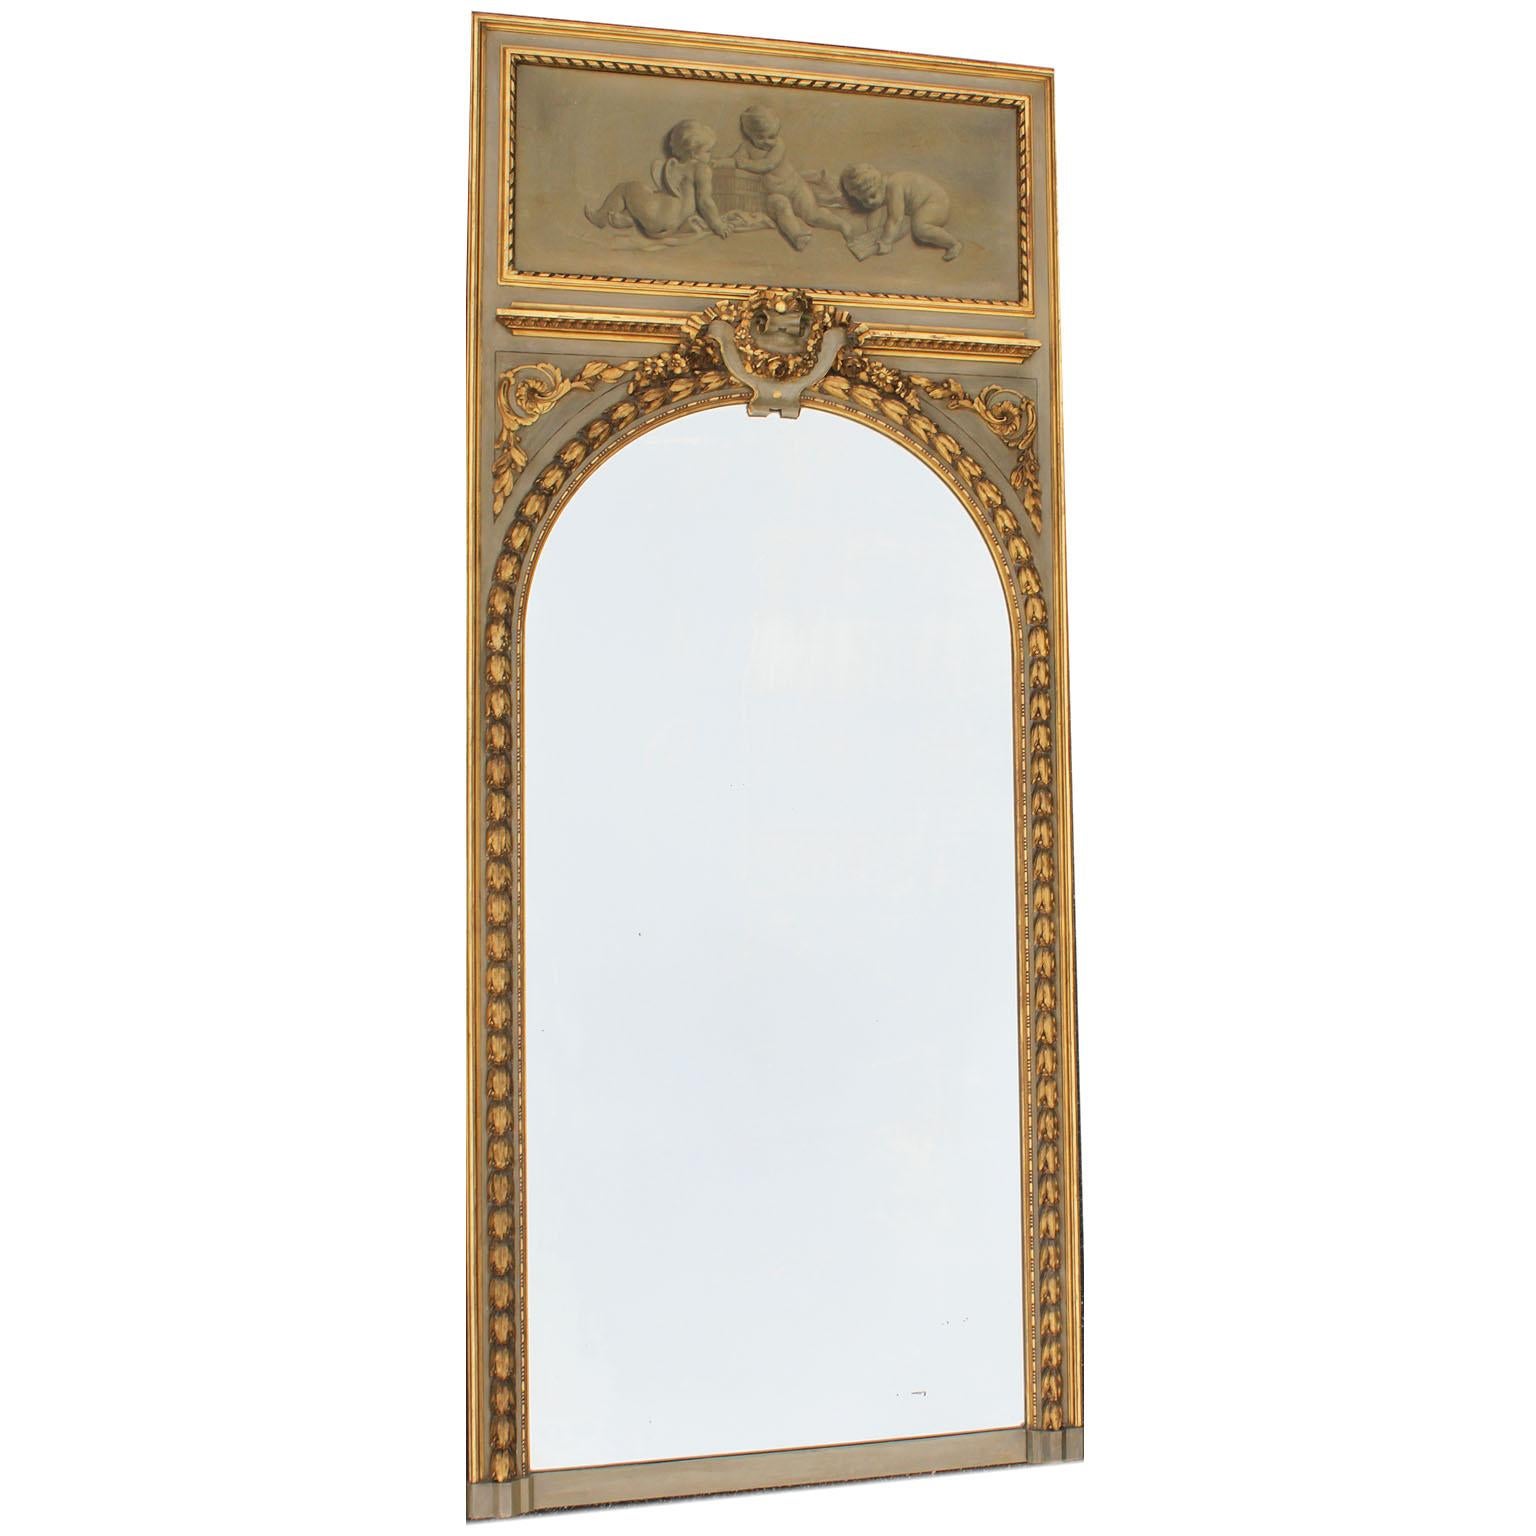 A fine pair of French 19th-20th century Louis XV style grey and parcel giltwood carved trumeau mirror frames. Each frame with an oil on canvas depicting allegorical playful putti and cherubs with a cage, one playing a horn, both within a